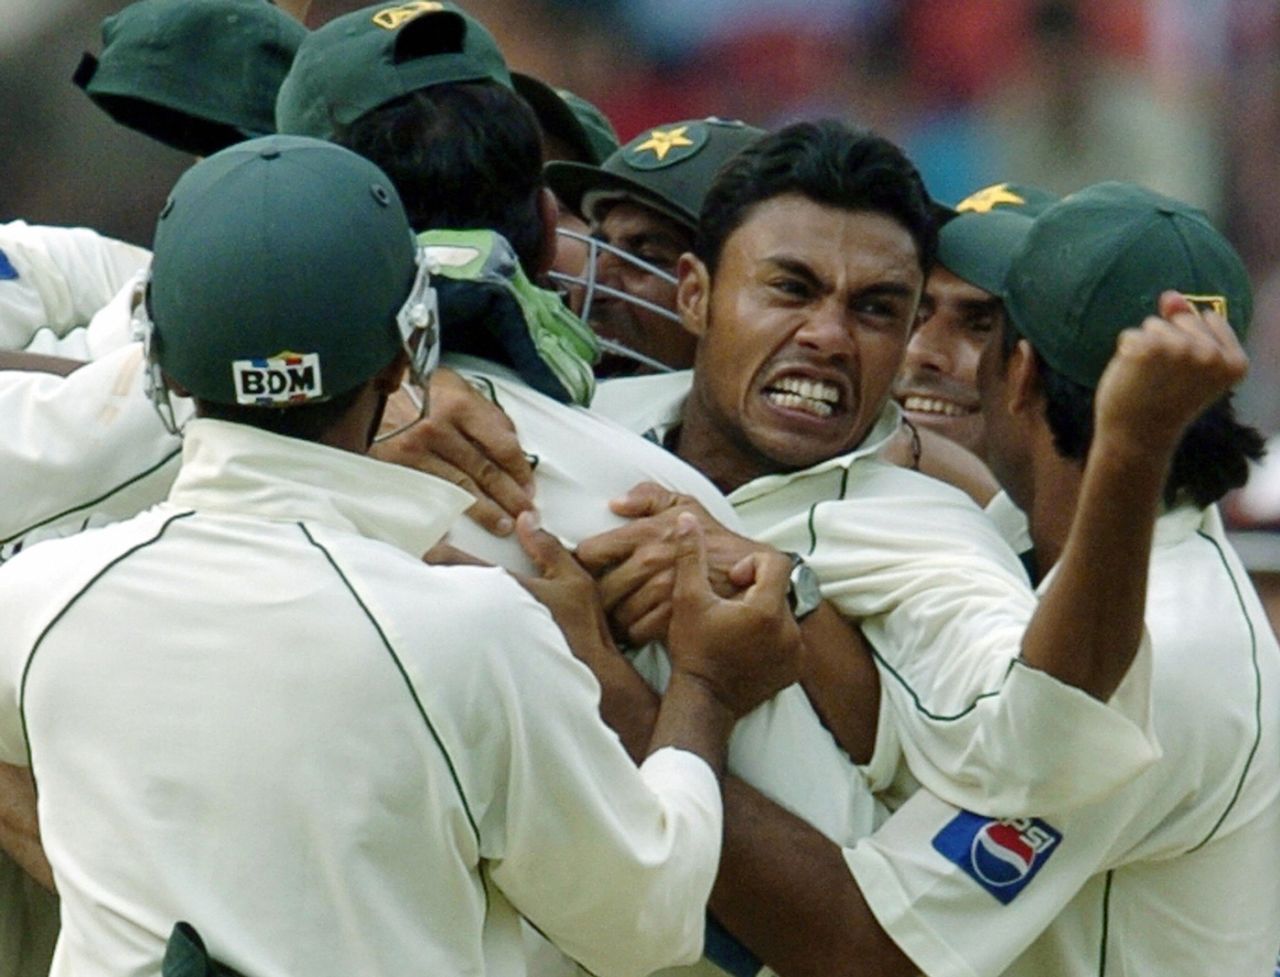 Danish Kaneria celebrates the final wicket with his team-mates, India v Pakistan, third Test, Bangalore, March 28, 2005